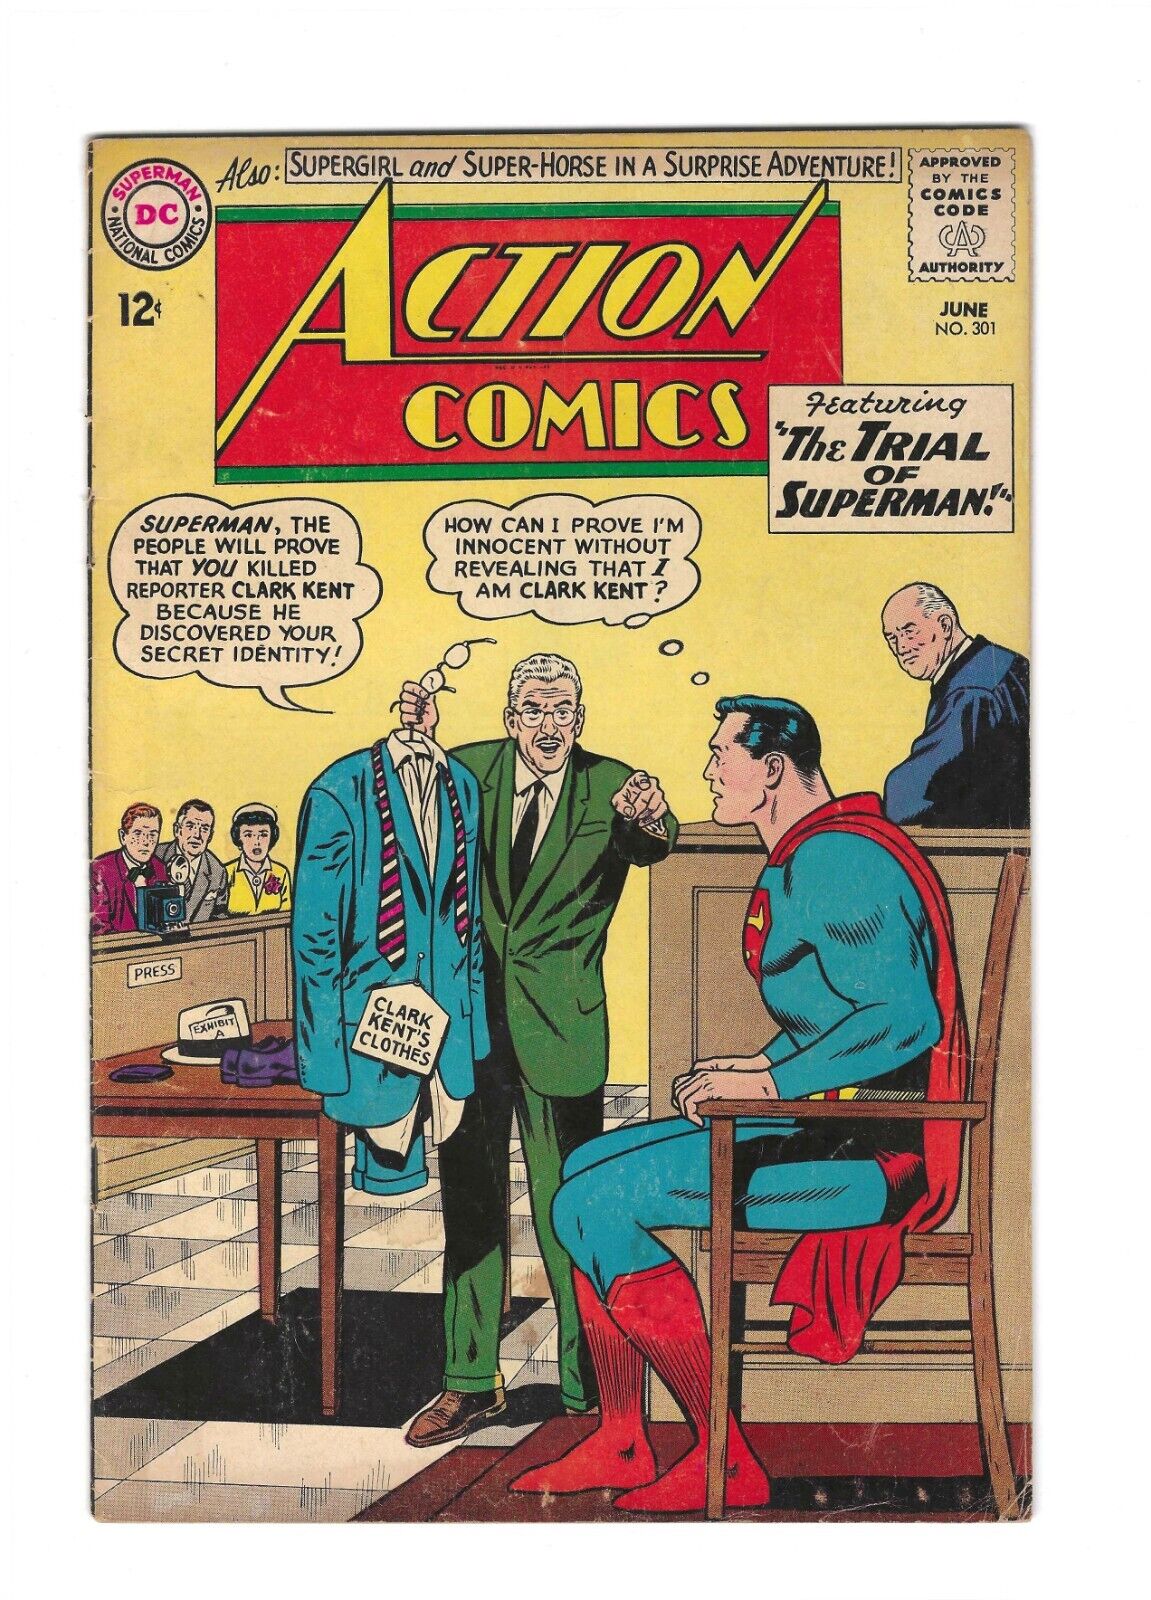 Action Comics #301: Dry Cleaned: Pressed: Bagged: Boarded FN 6.0